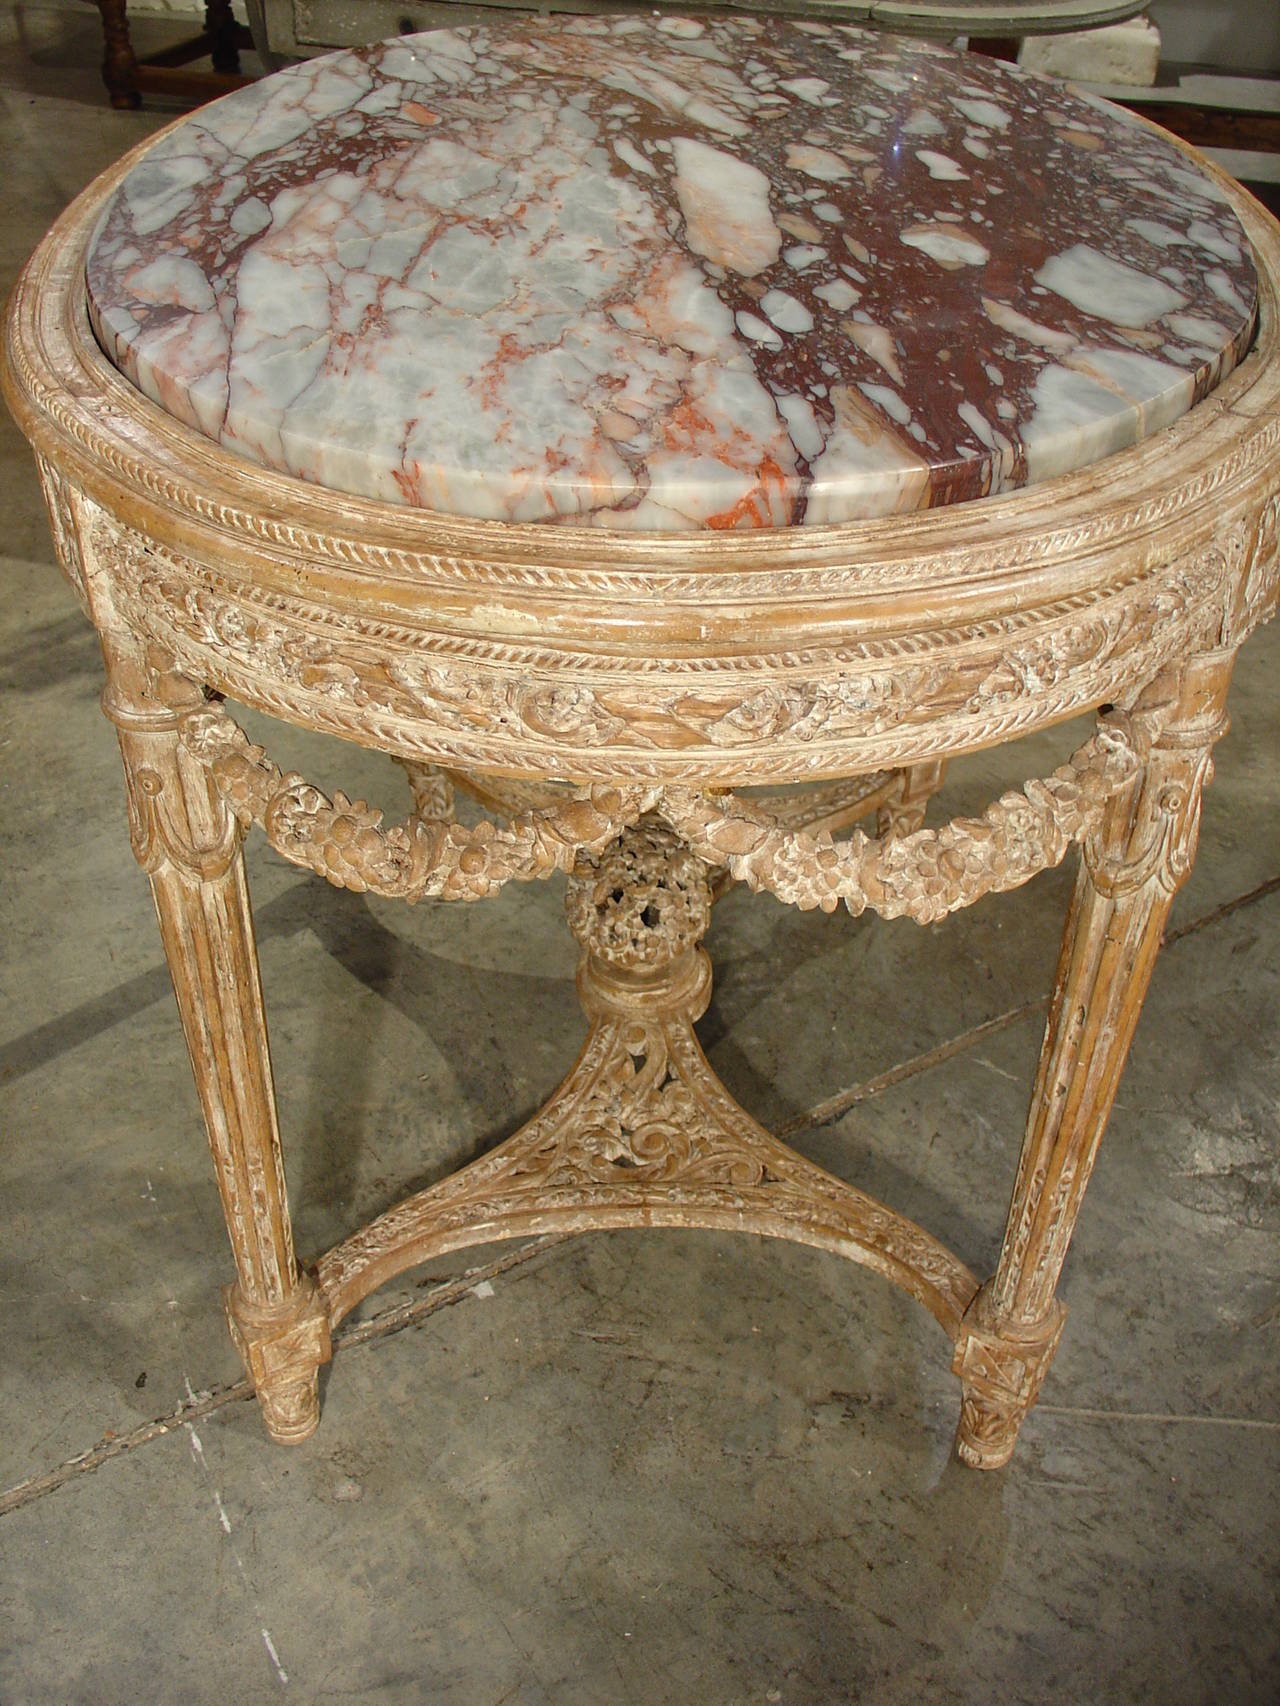 Beautiful up close as well as from a distance, this elegant parcel paint, antique French, Louis XVI style center table is the epitome of ornamentation in the Louis XVI period. The hand carving of flowers, ribbons and garlands on the table is packed